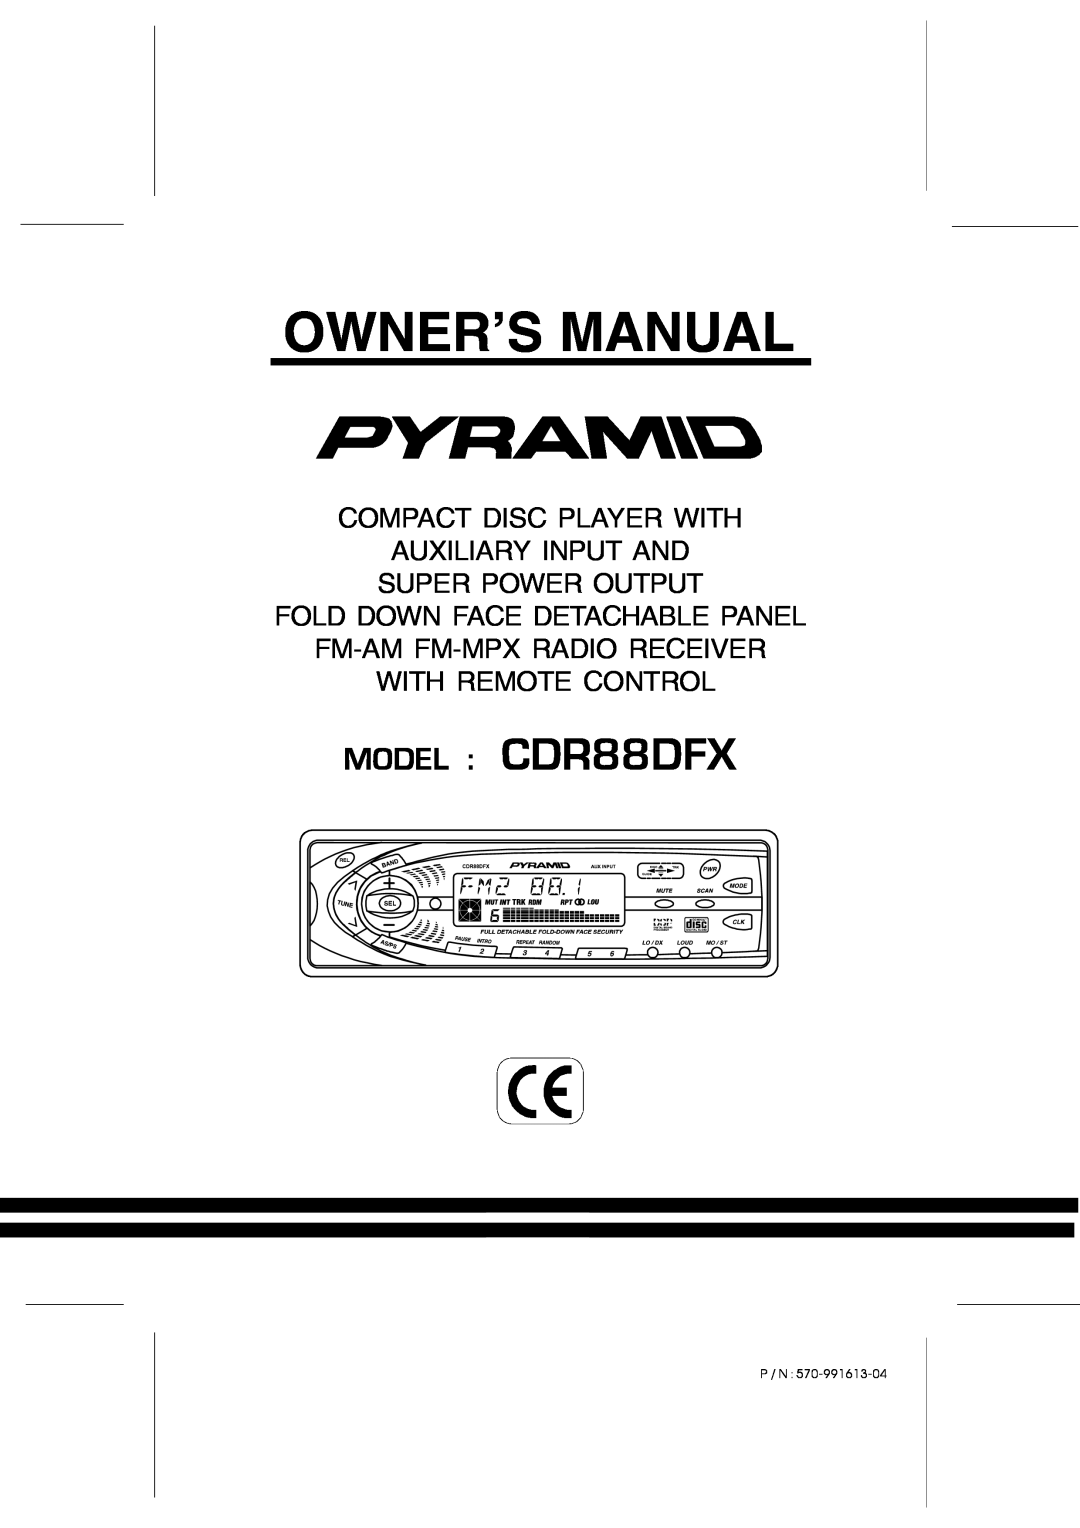 Pyramid Car Audio owner manual Page, MODEL CDR88DFX, Compact Disc Player With Auxiliary Input And, Super Power Output 